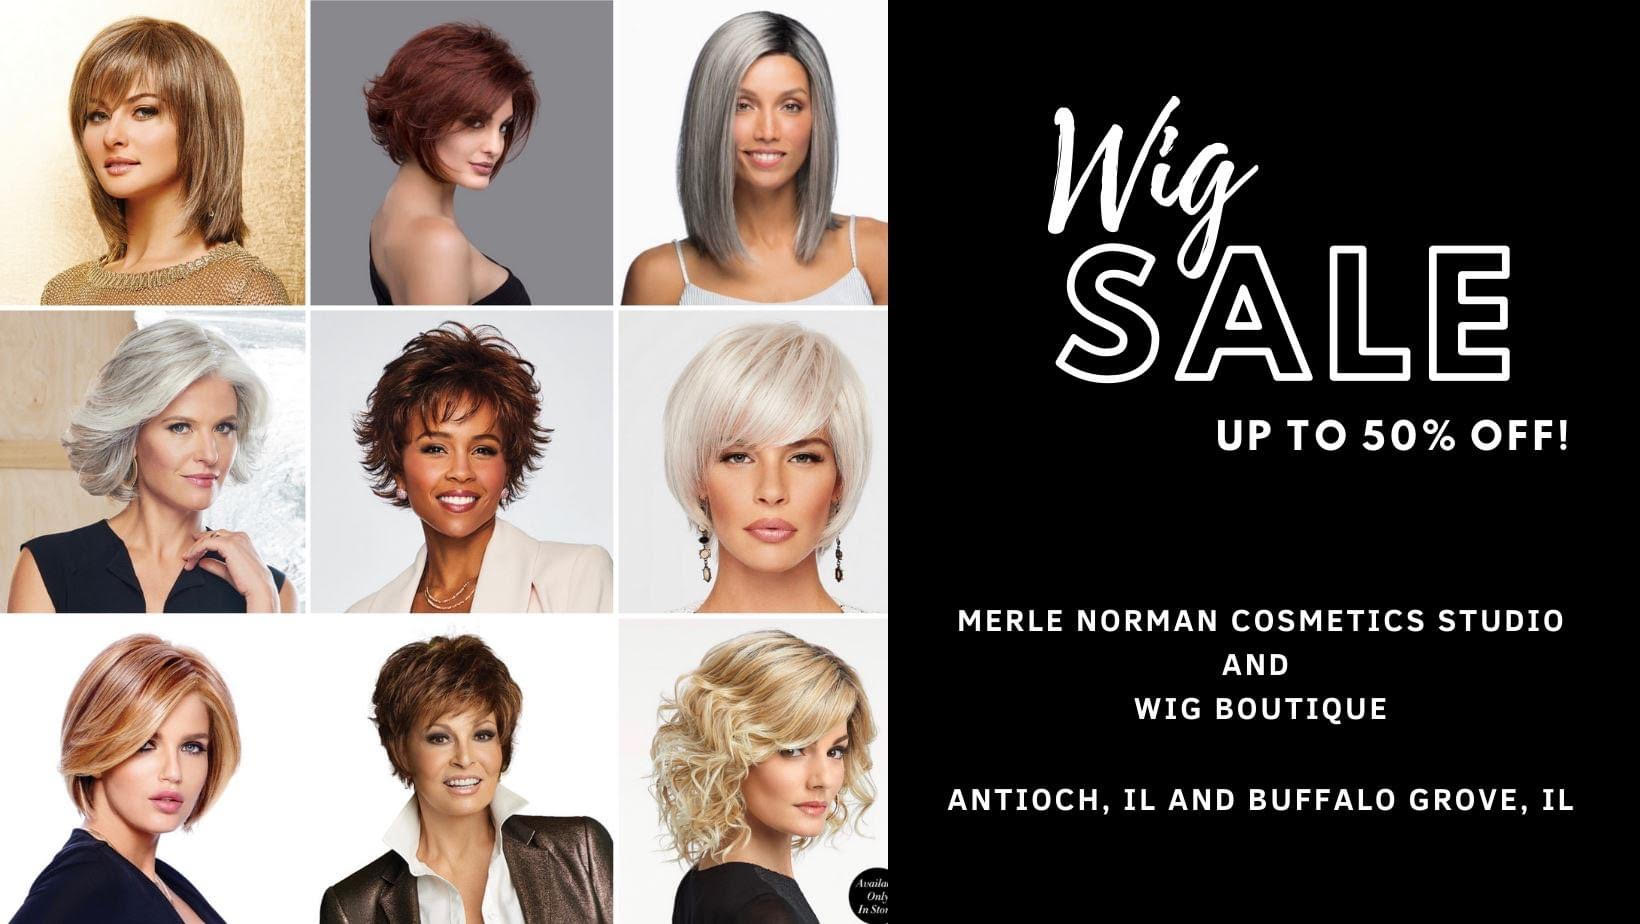 Semi-Annual Wig Sale April 2023 - 20-50% OFF all in-stock wigs from April 1-30.
We carry a variety o Merle Norman Cosmetics, Wigs and Boutique Antioch (224)788-8820